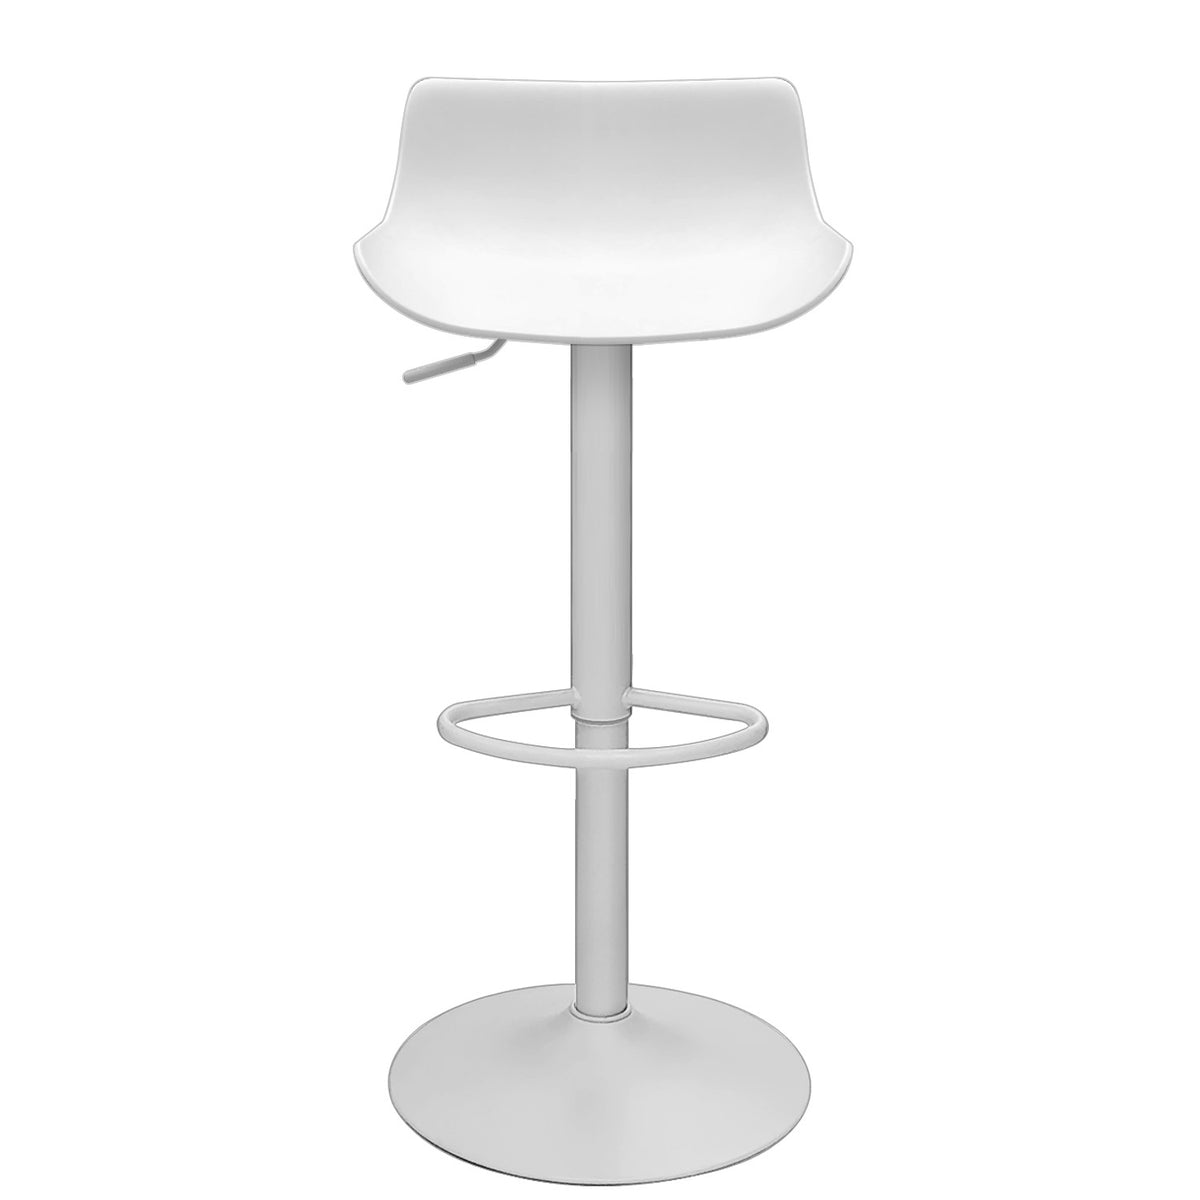 FANBYN bar stool with backrest, white/indoor/outdoor, 251/4 - IKEA